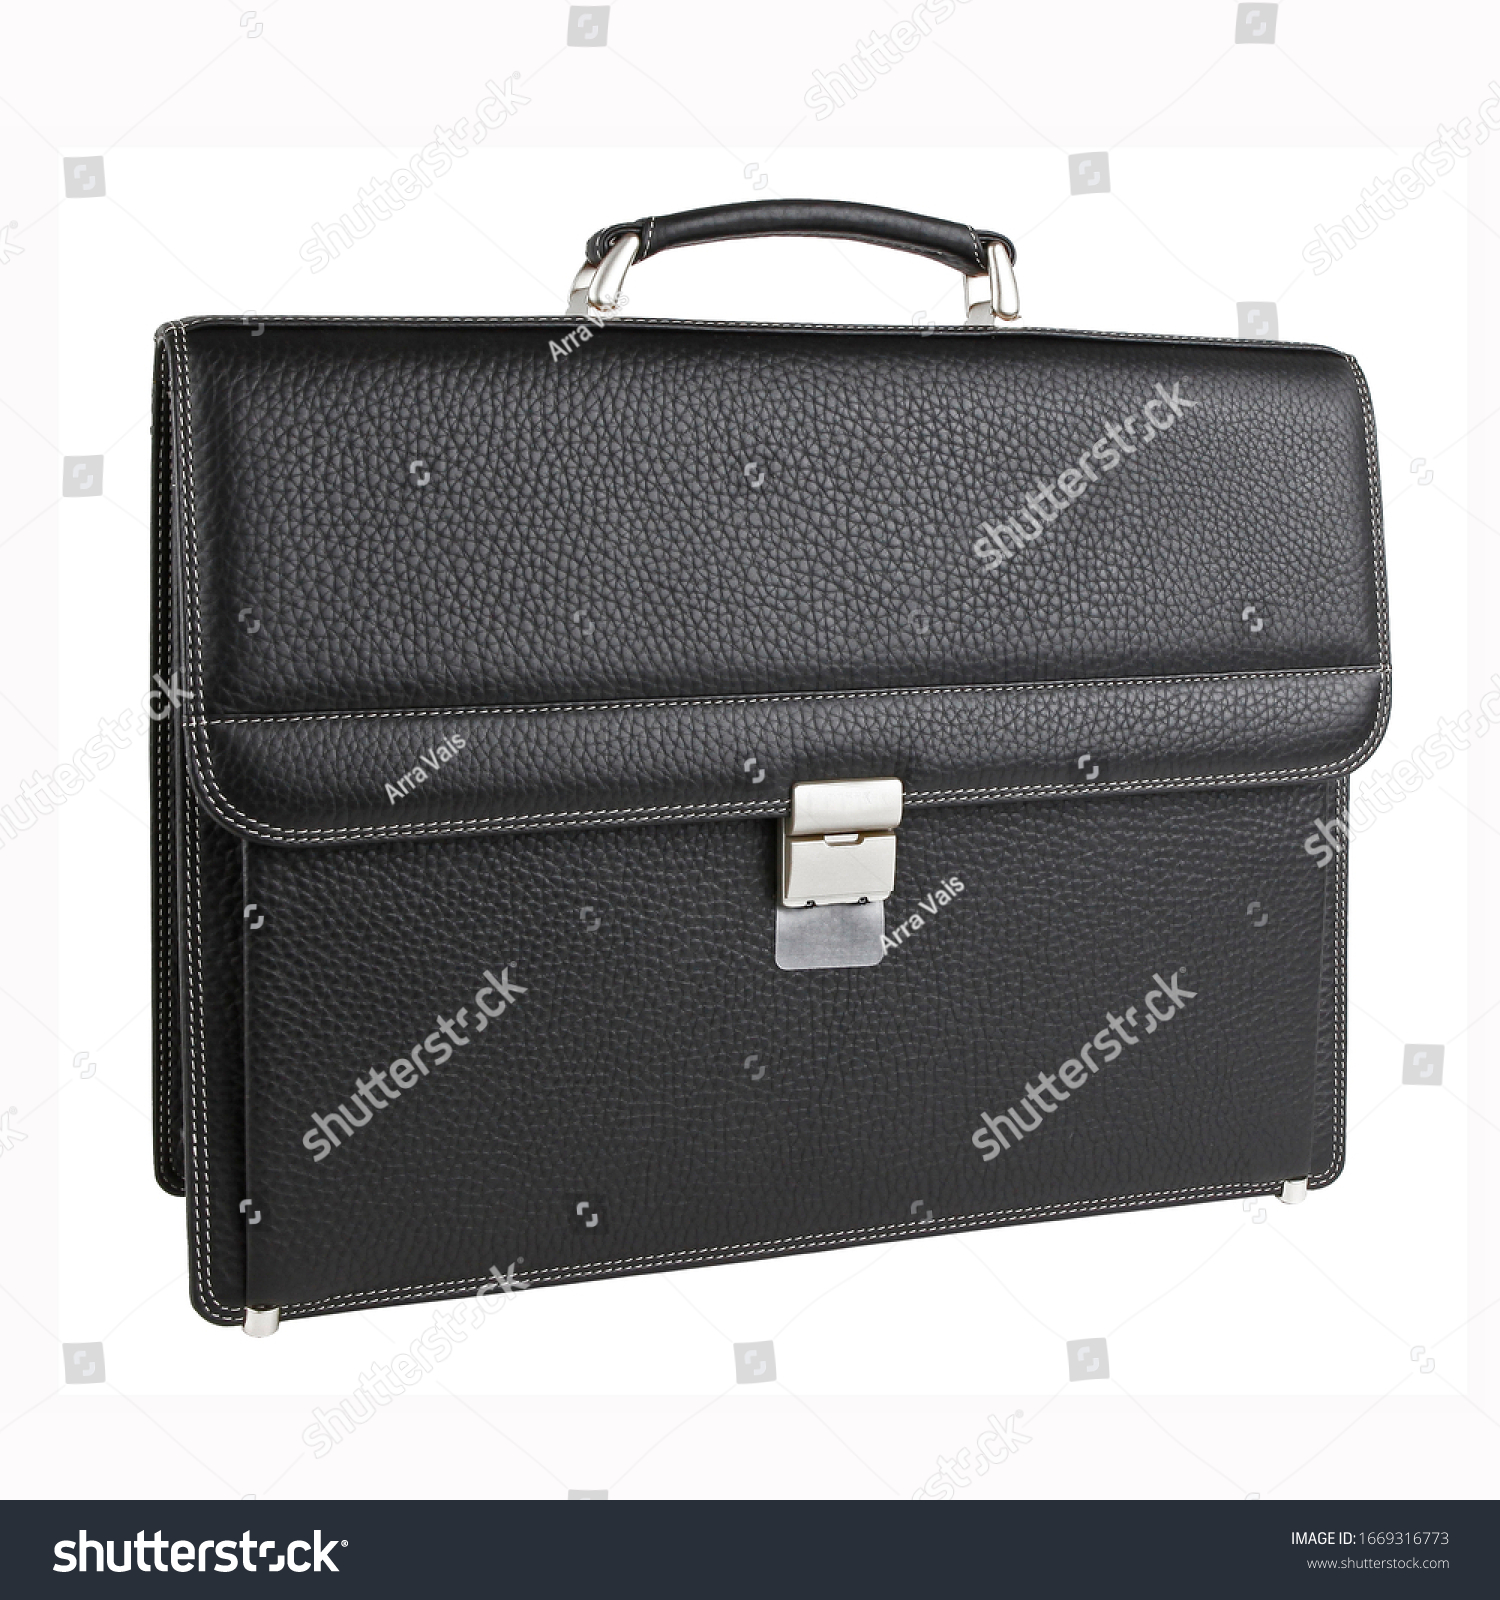 New fashion male business bag or briefcase in black leather. Without shadows. Isolated on white background  #1669316773